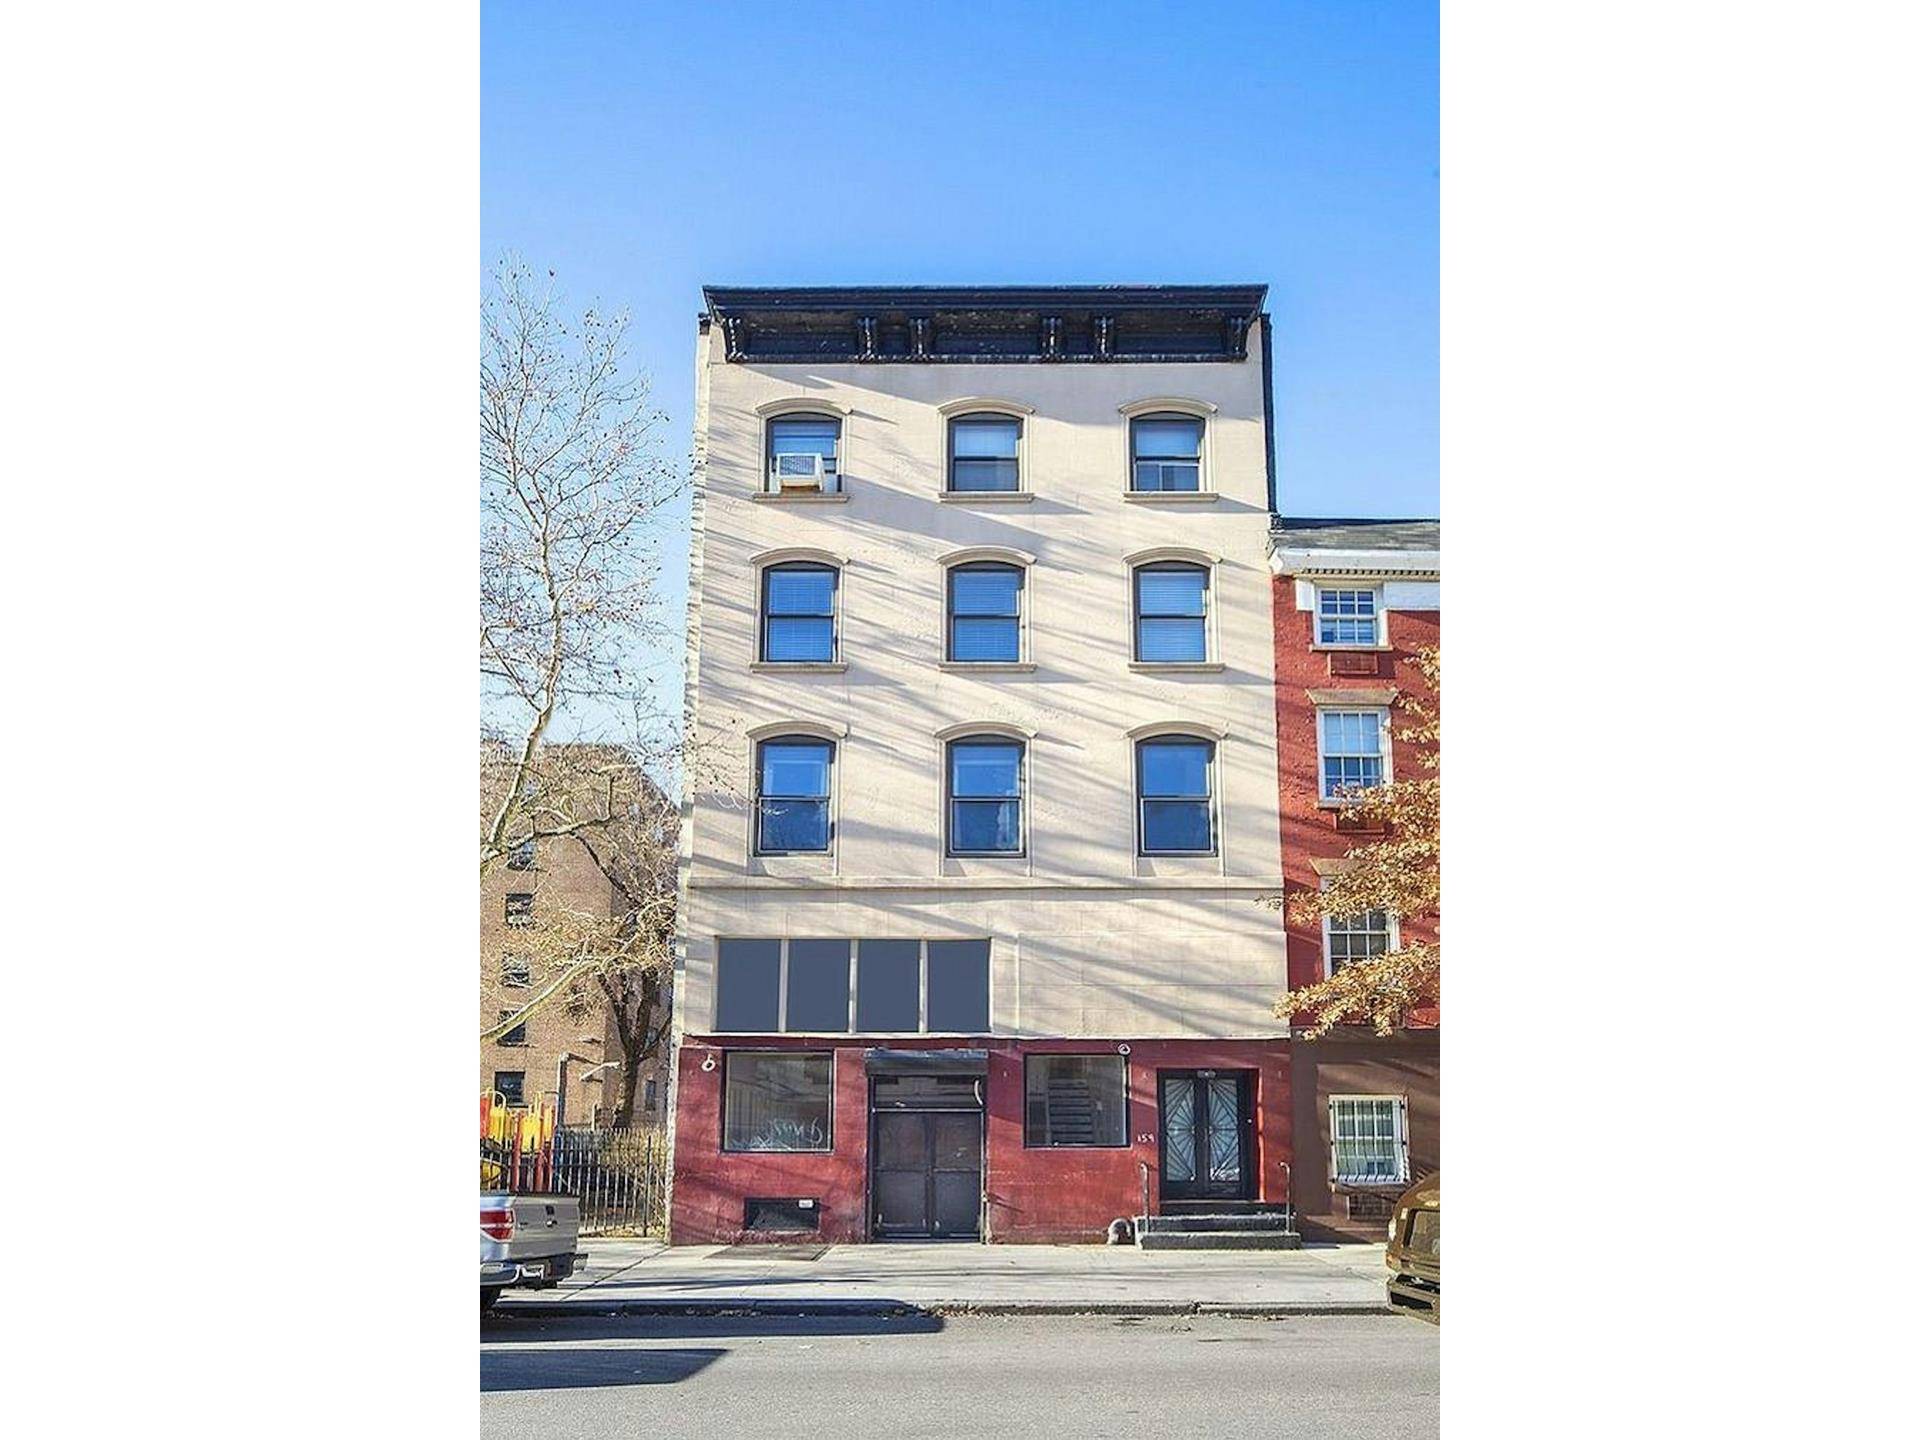 Set in the heart of a vibrant neighborhood This street level Store Front is a white box with a dramatic 17 ft ceilings front are with open plan stairs to ...